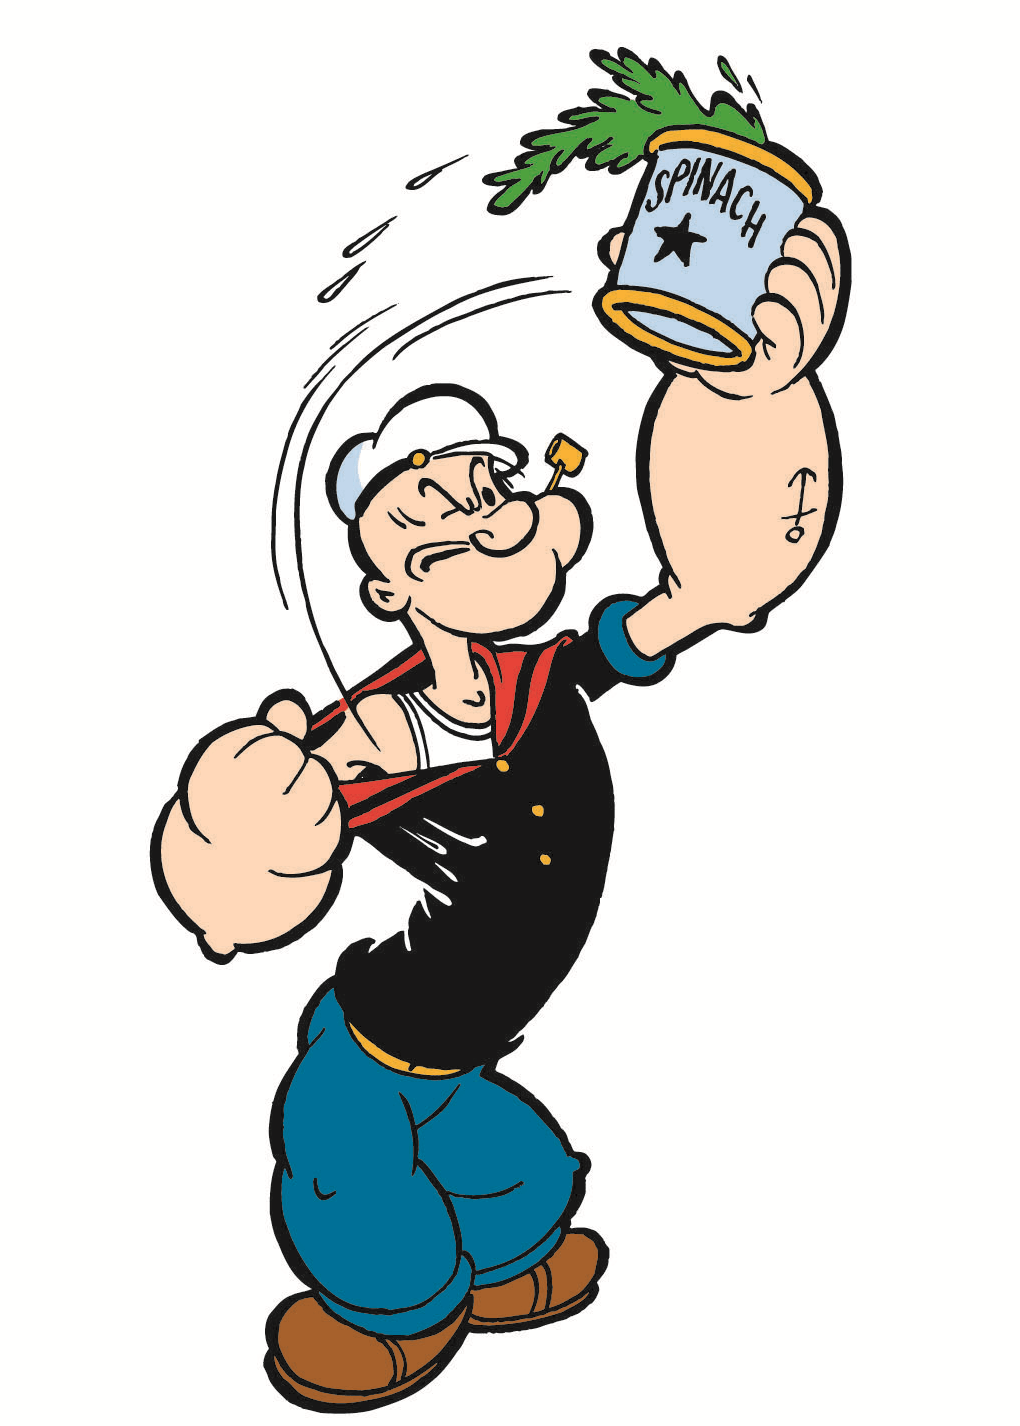 Popeye HD Wallpaper for iPhone